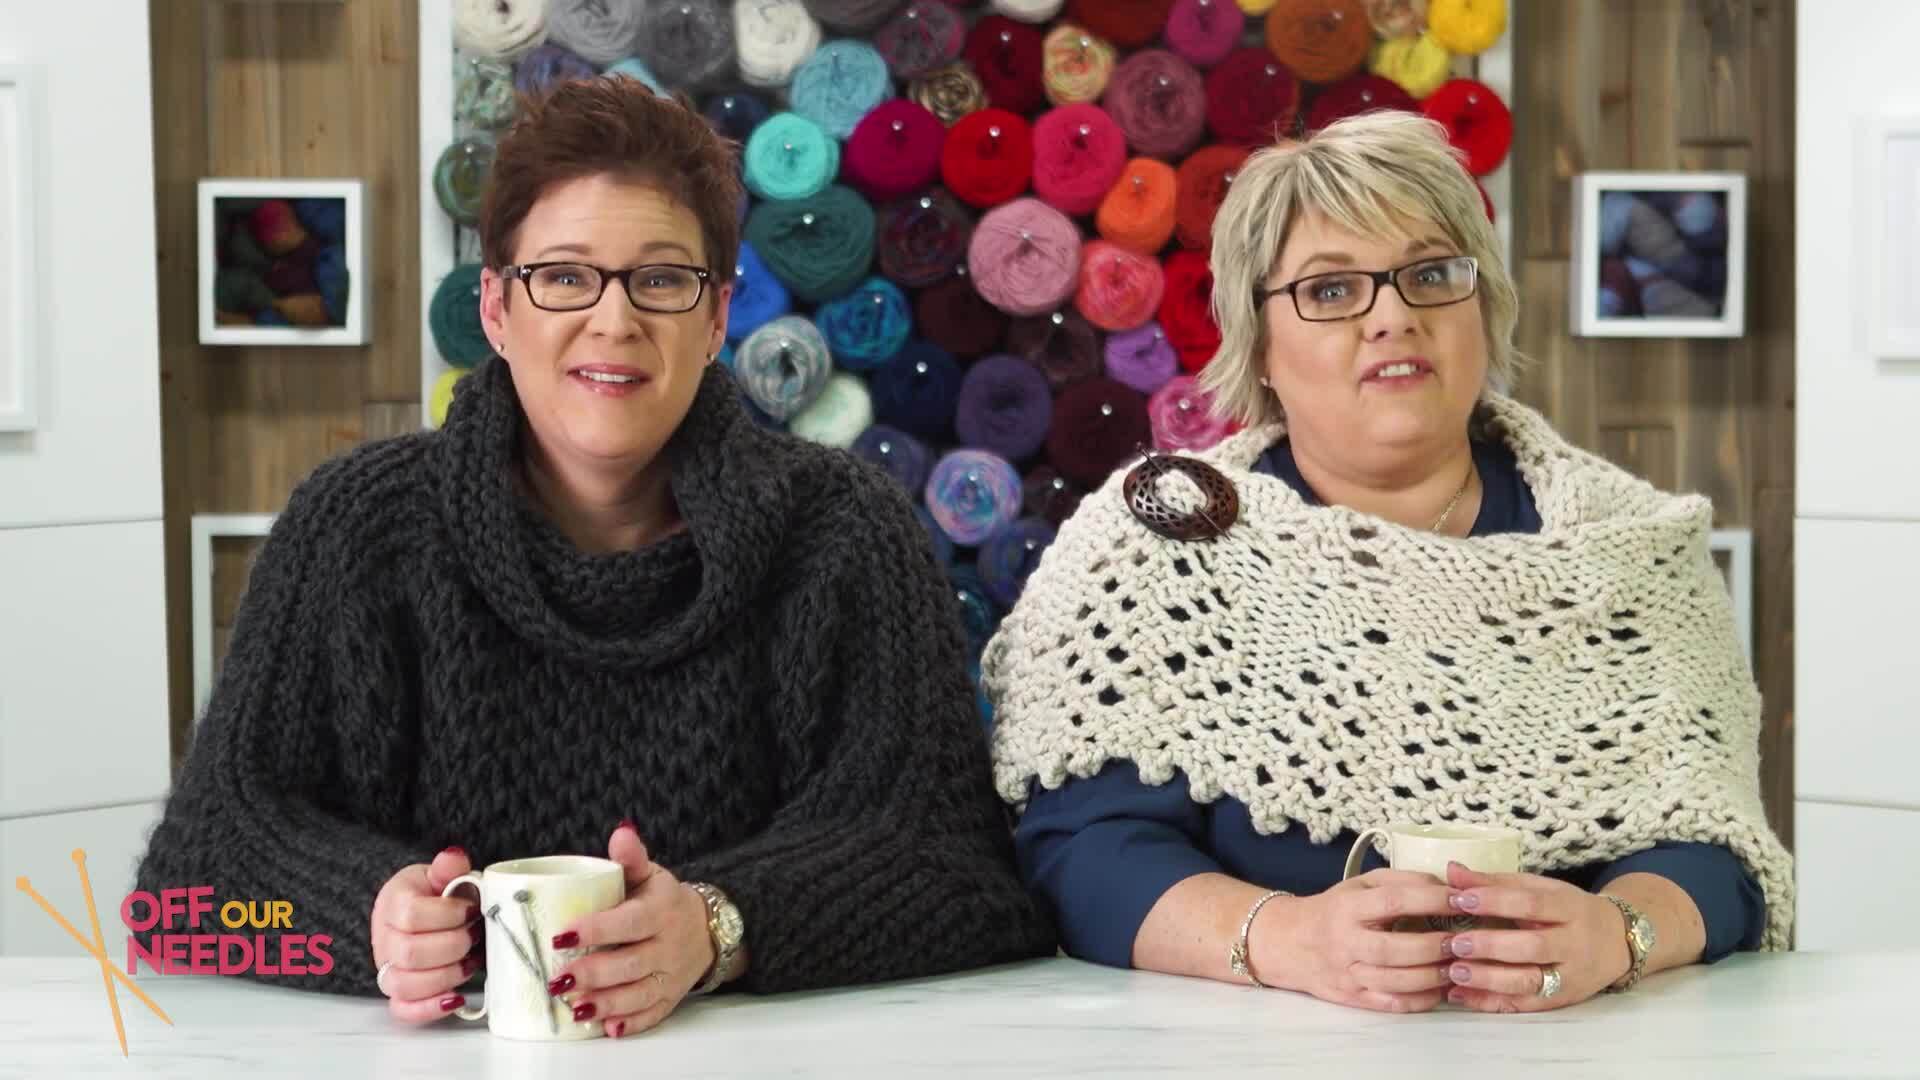 Are you a GROSS KNITTER?